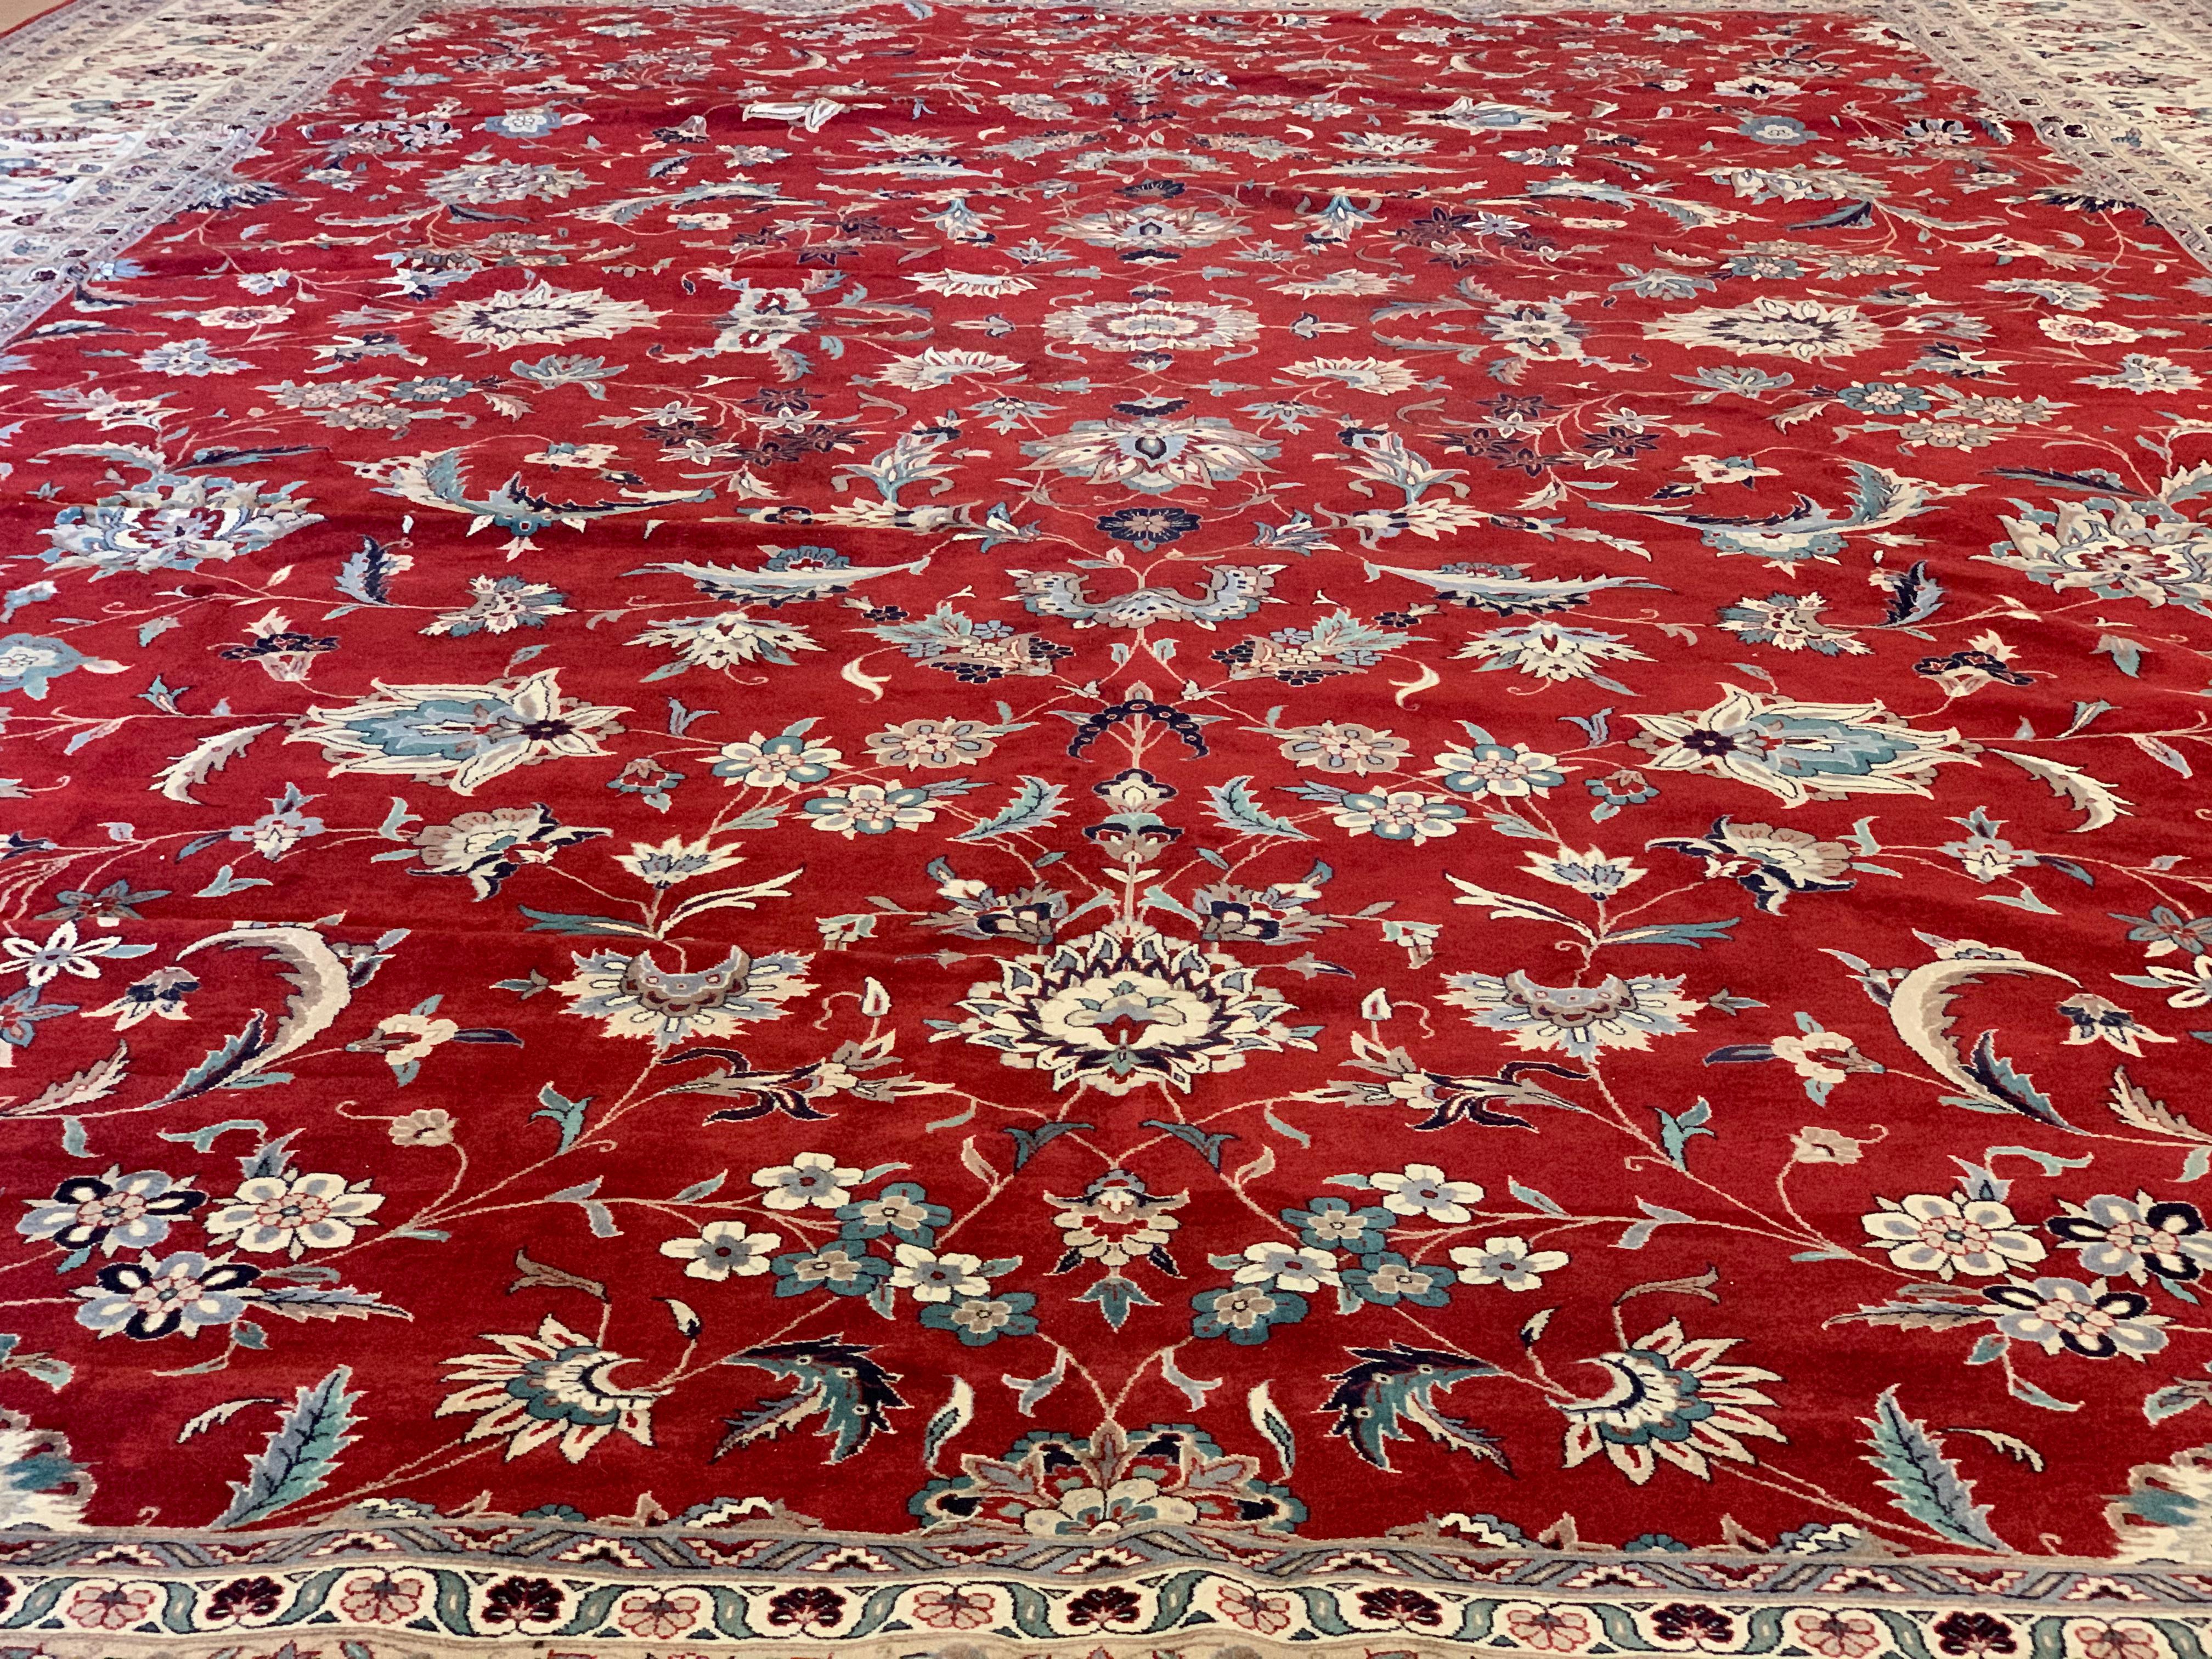 This is a vintage hand-knotted Isfahan Rug, made in central Persia circa 1950s, in excellent condition for its age. It is wool knots on cotton warp and weft, and has an incredibly fine knot count. The rug is signed, and is approximately 12 x 18.5